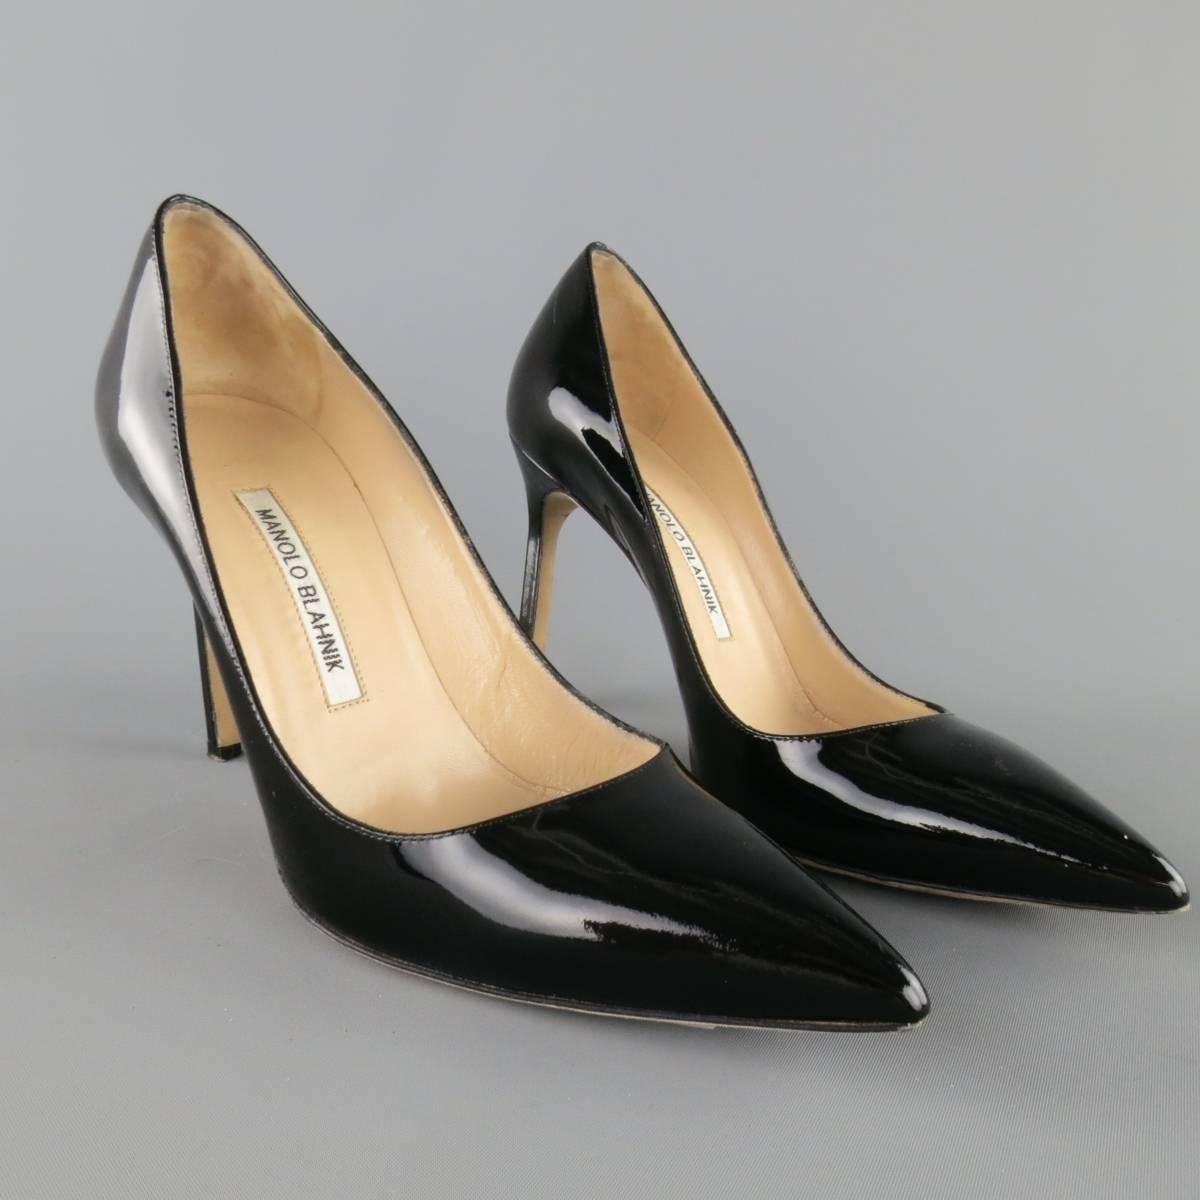 Classic MANOLO BLAHNIK pump in high gloss black patent leather with a pointed toe and covered stiletto heel. Hand made in Italy.
 
Excellent Pre-Owned Condition.
Marked: IT 37.5
 
Heel: 4 in.


Web ID: 83521 